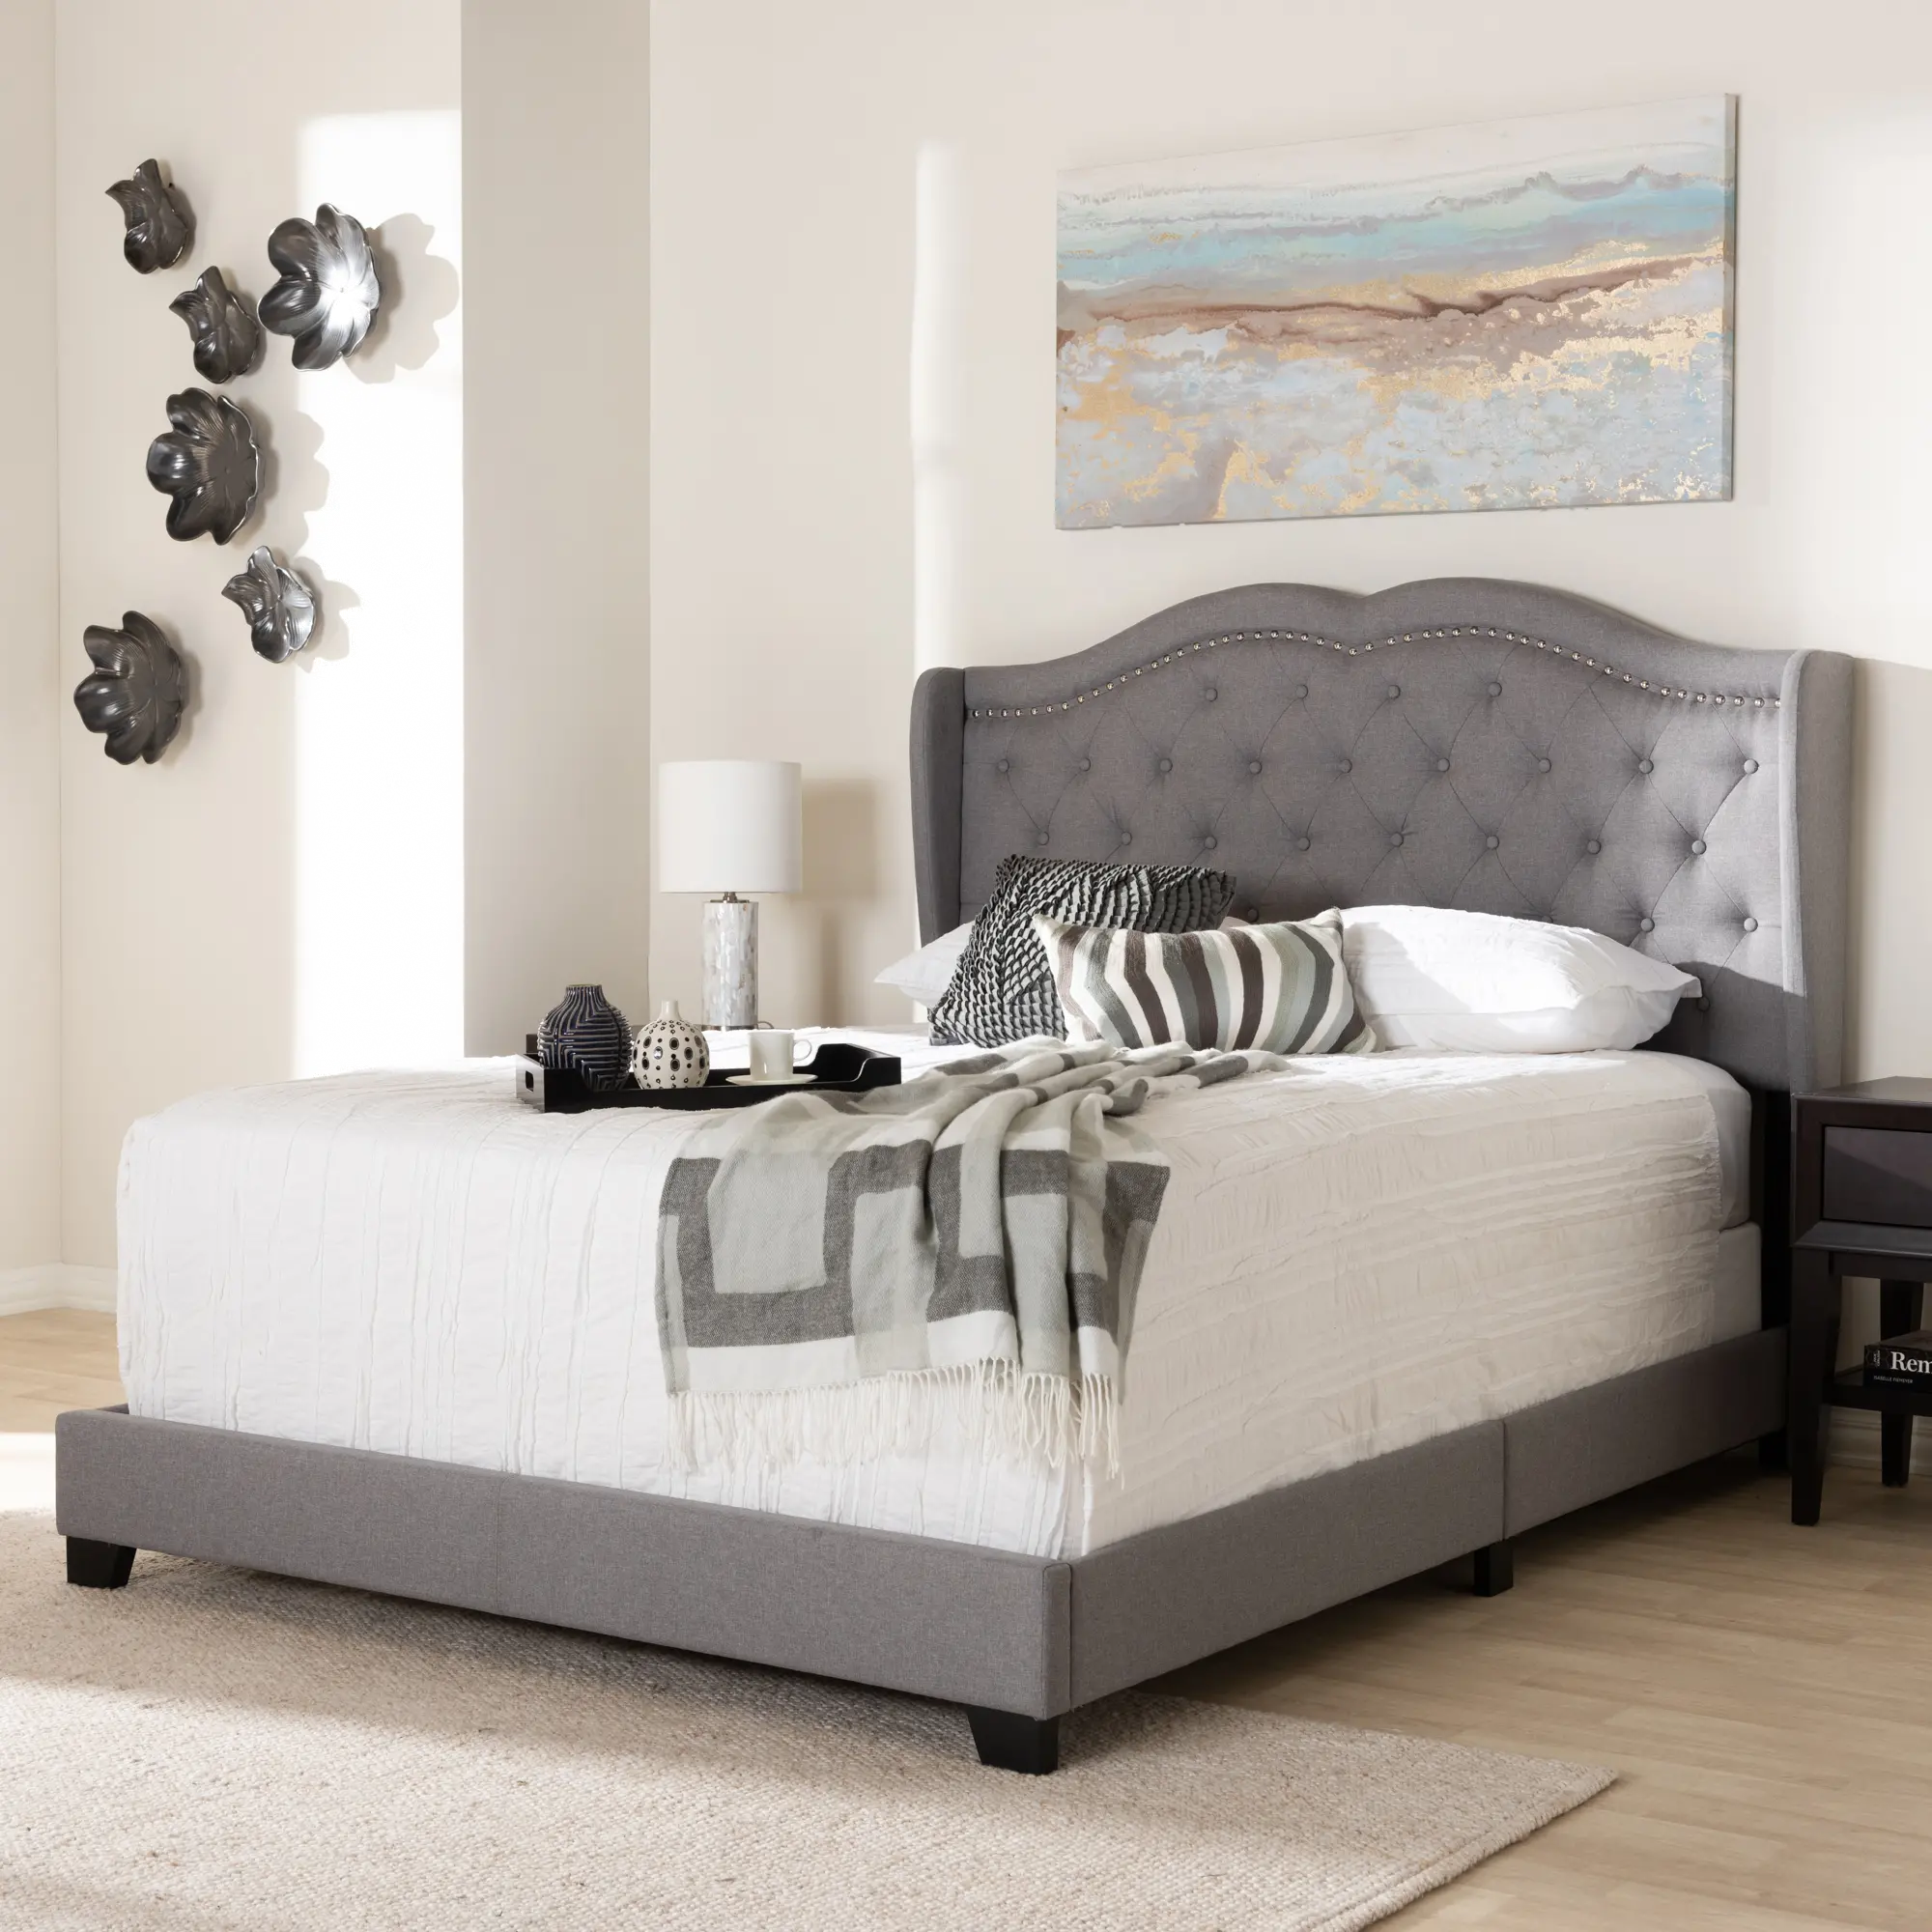 149-8972-RCW Contemporary Light Gray Upholstered King Bed - Lai sku 149-8972-RCW